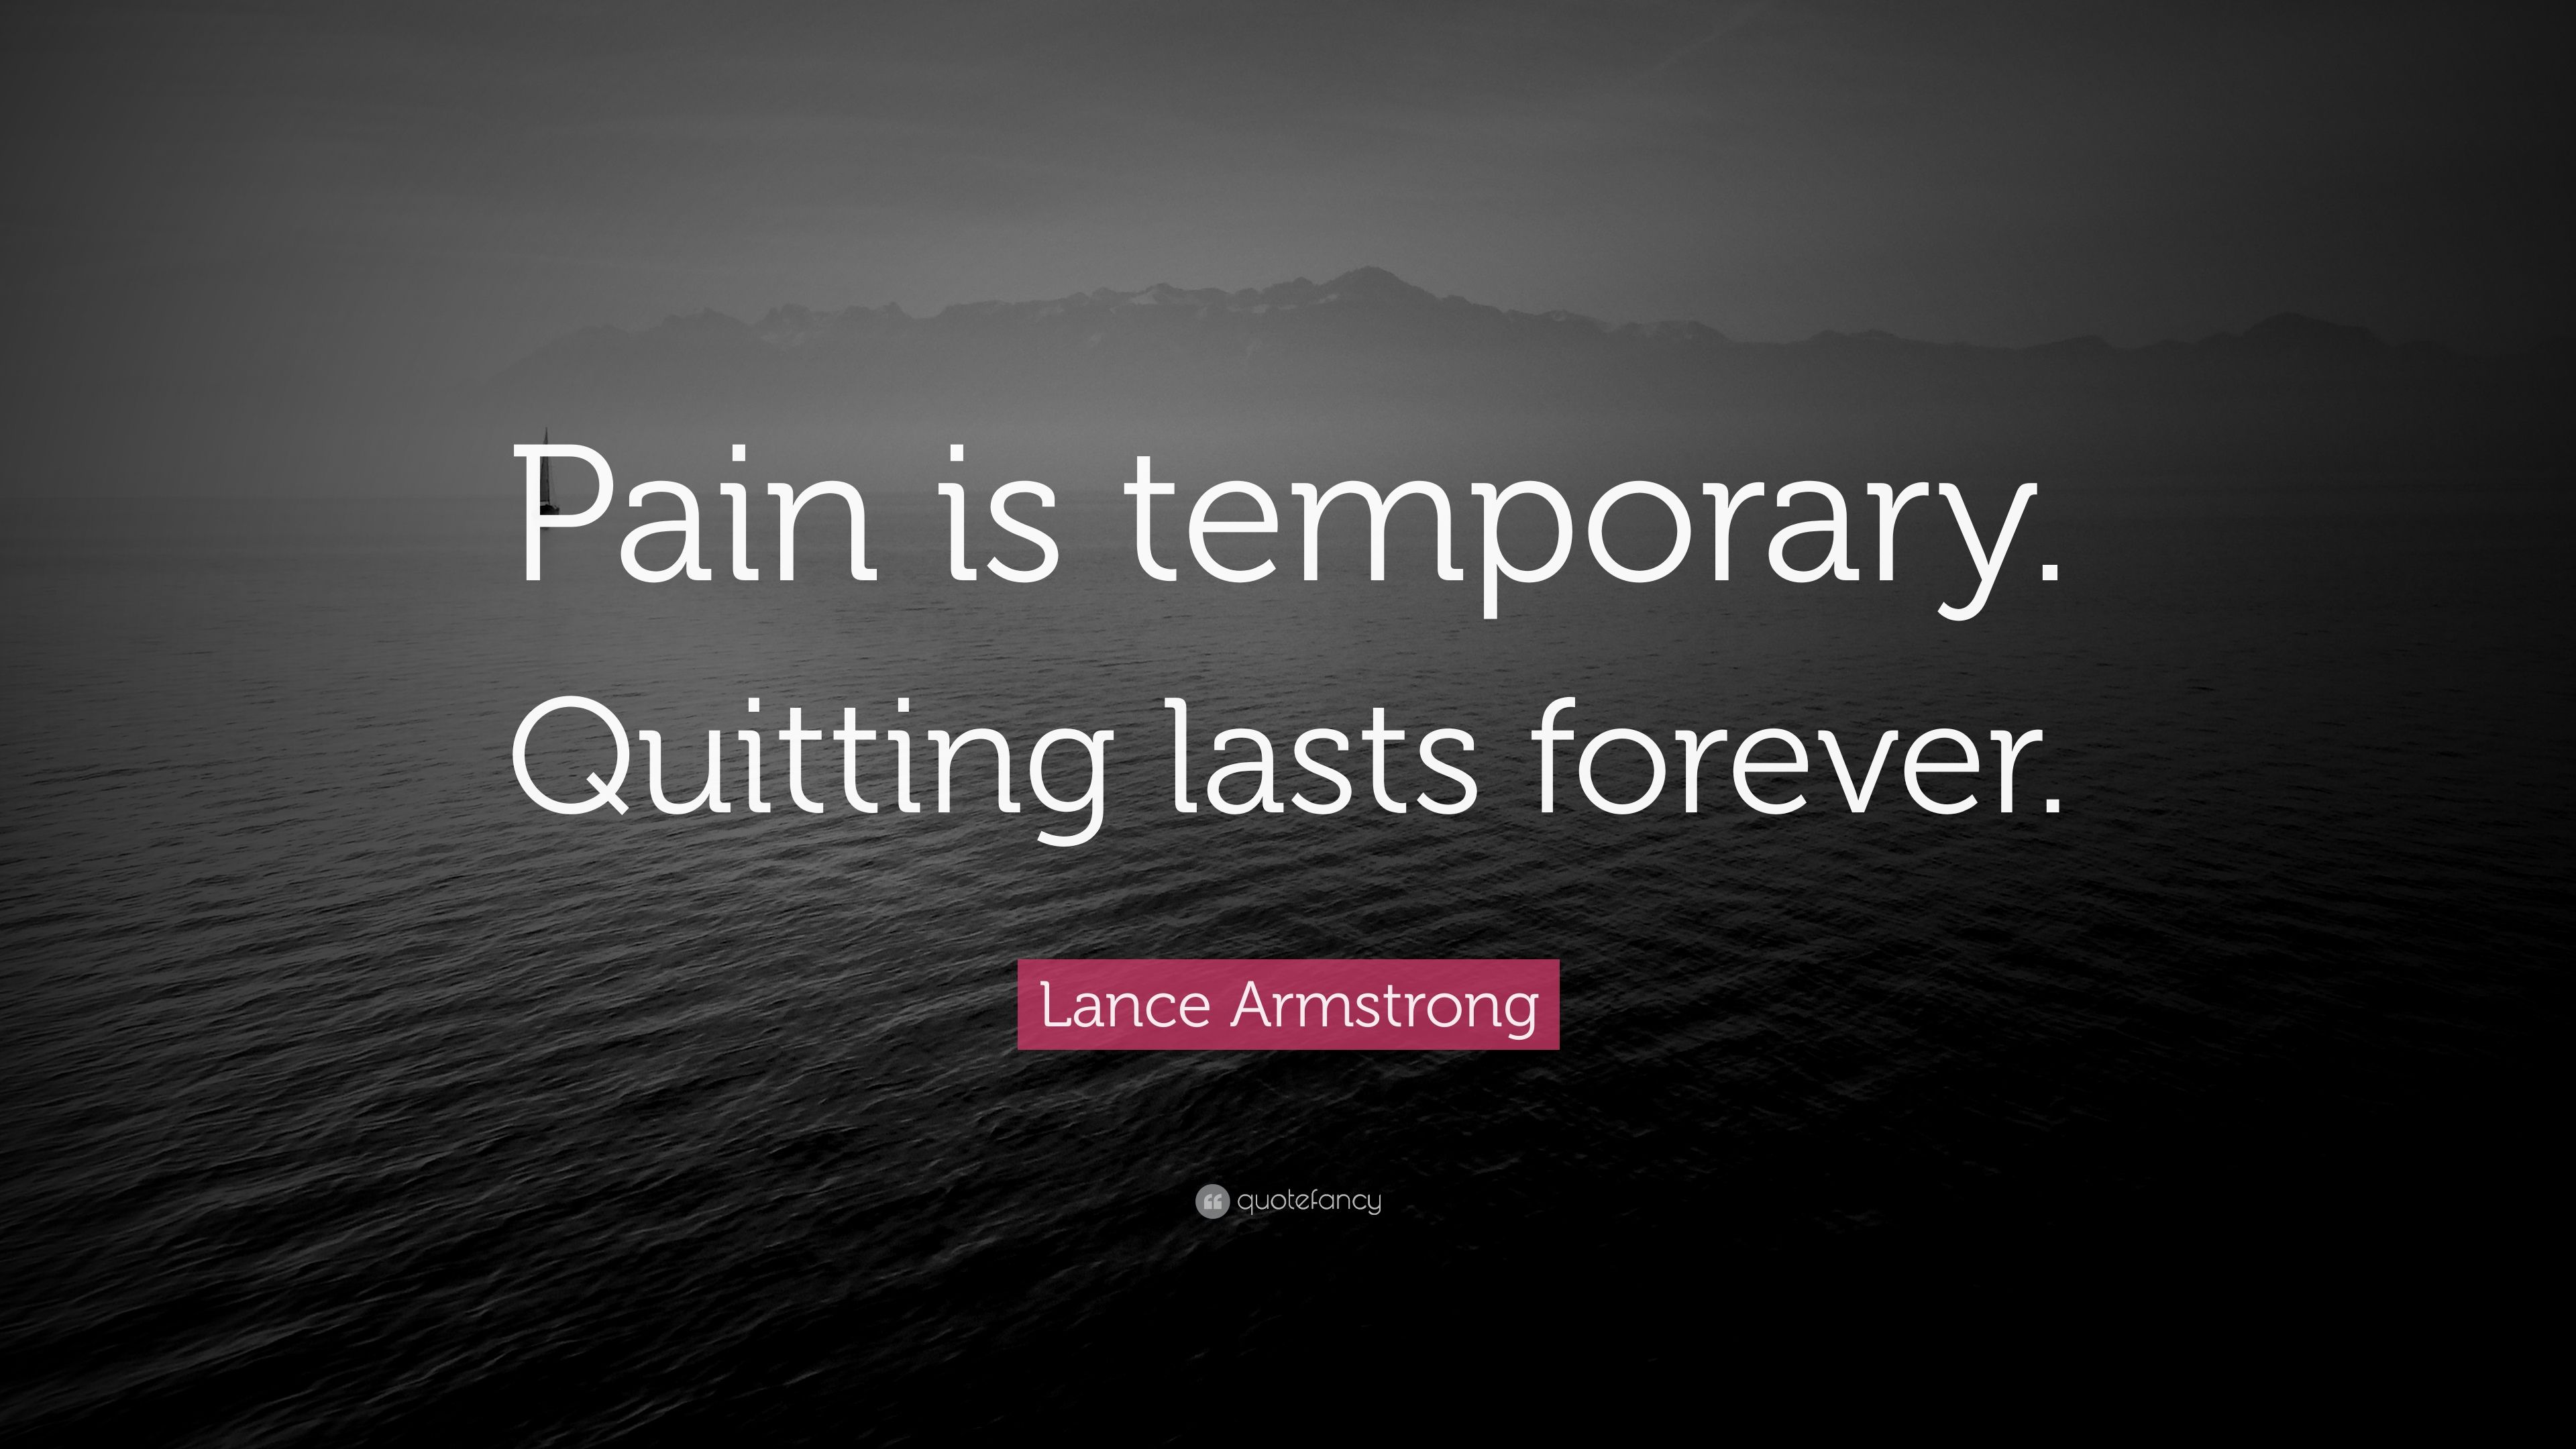 Pain Quotes Wallpapers - Wallpaper Cave